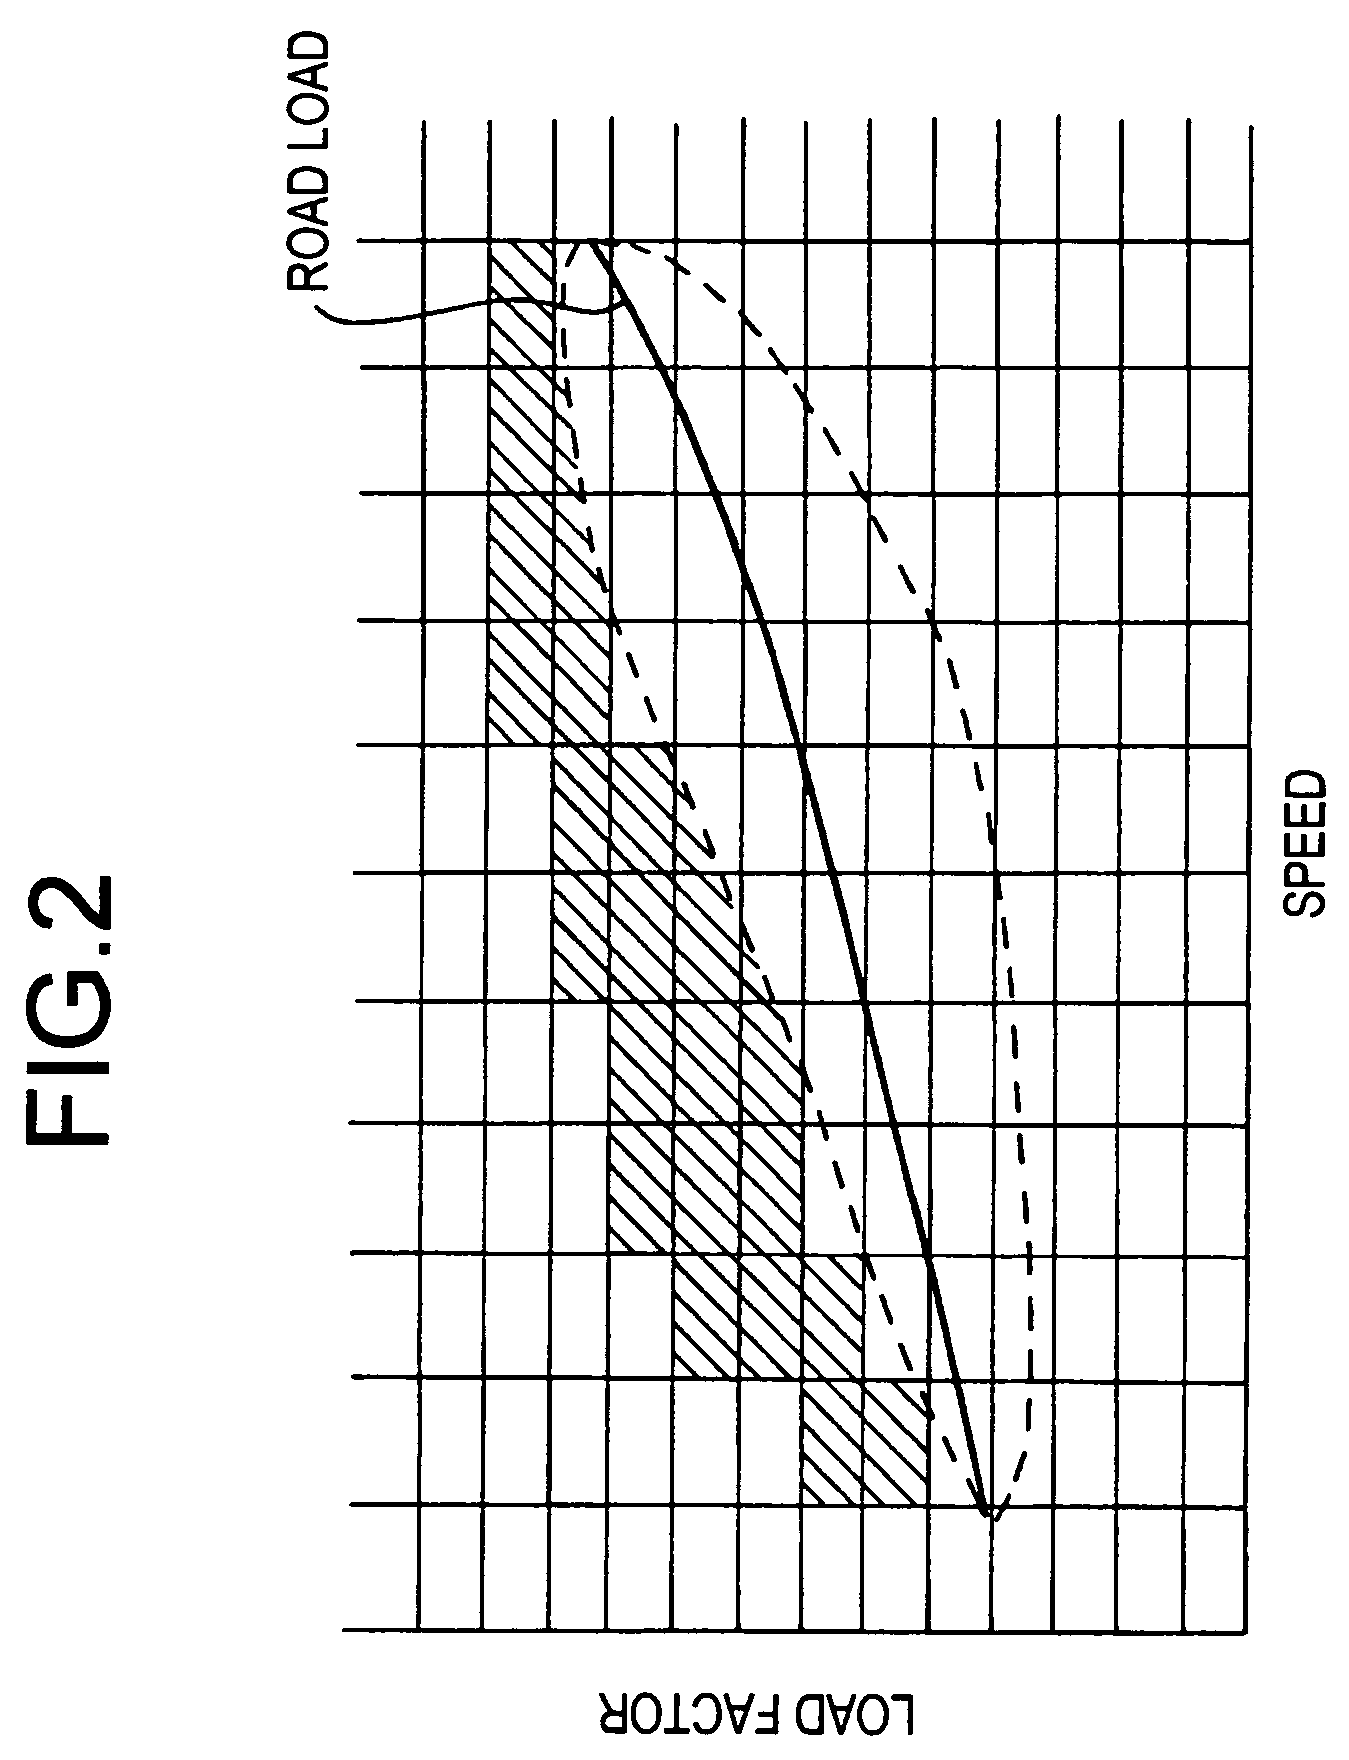 Control system for continuously variable transmission of vehicle